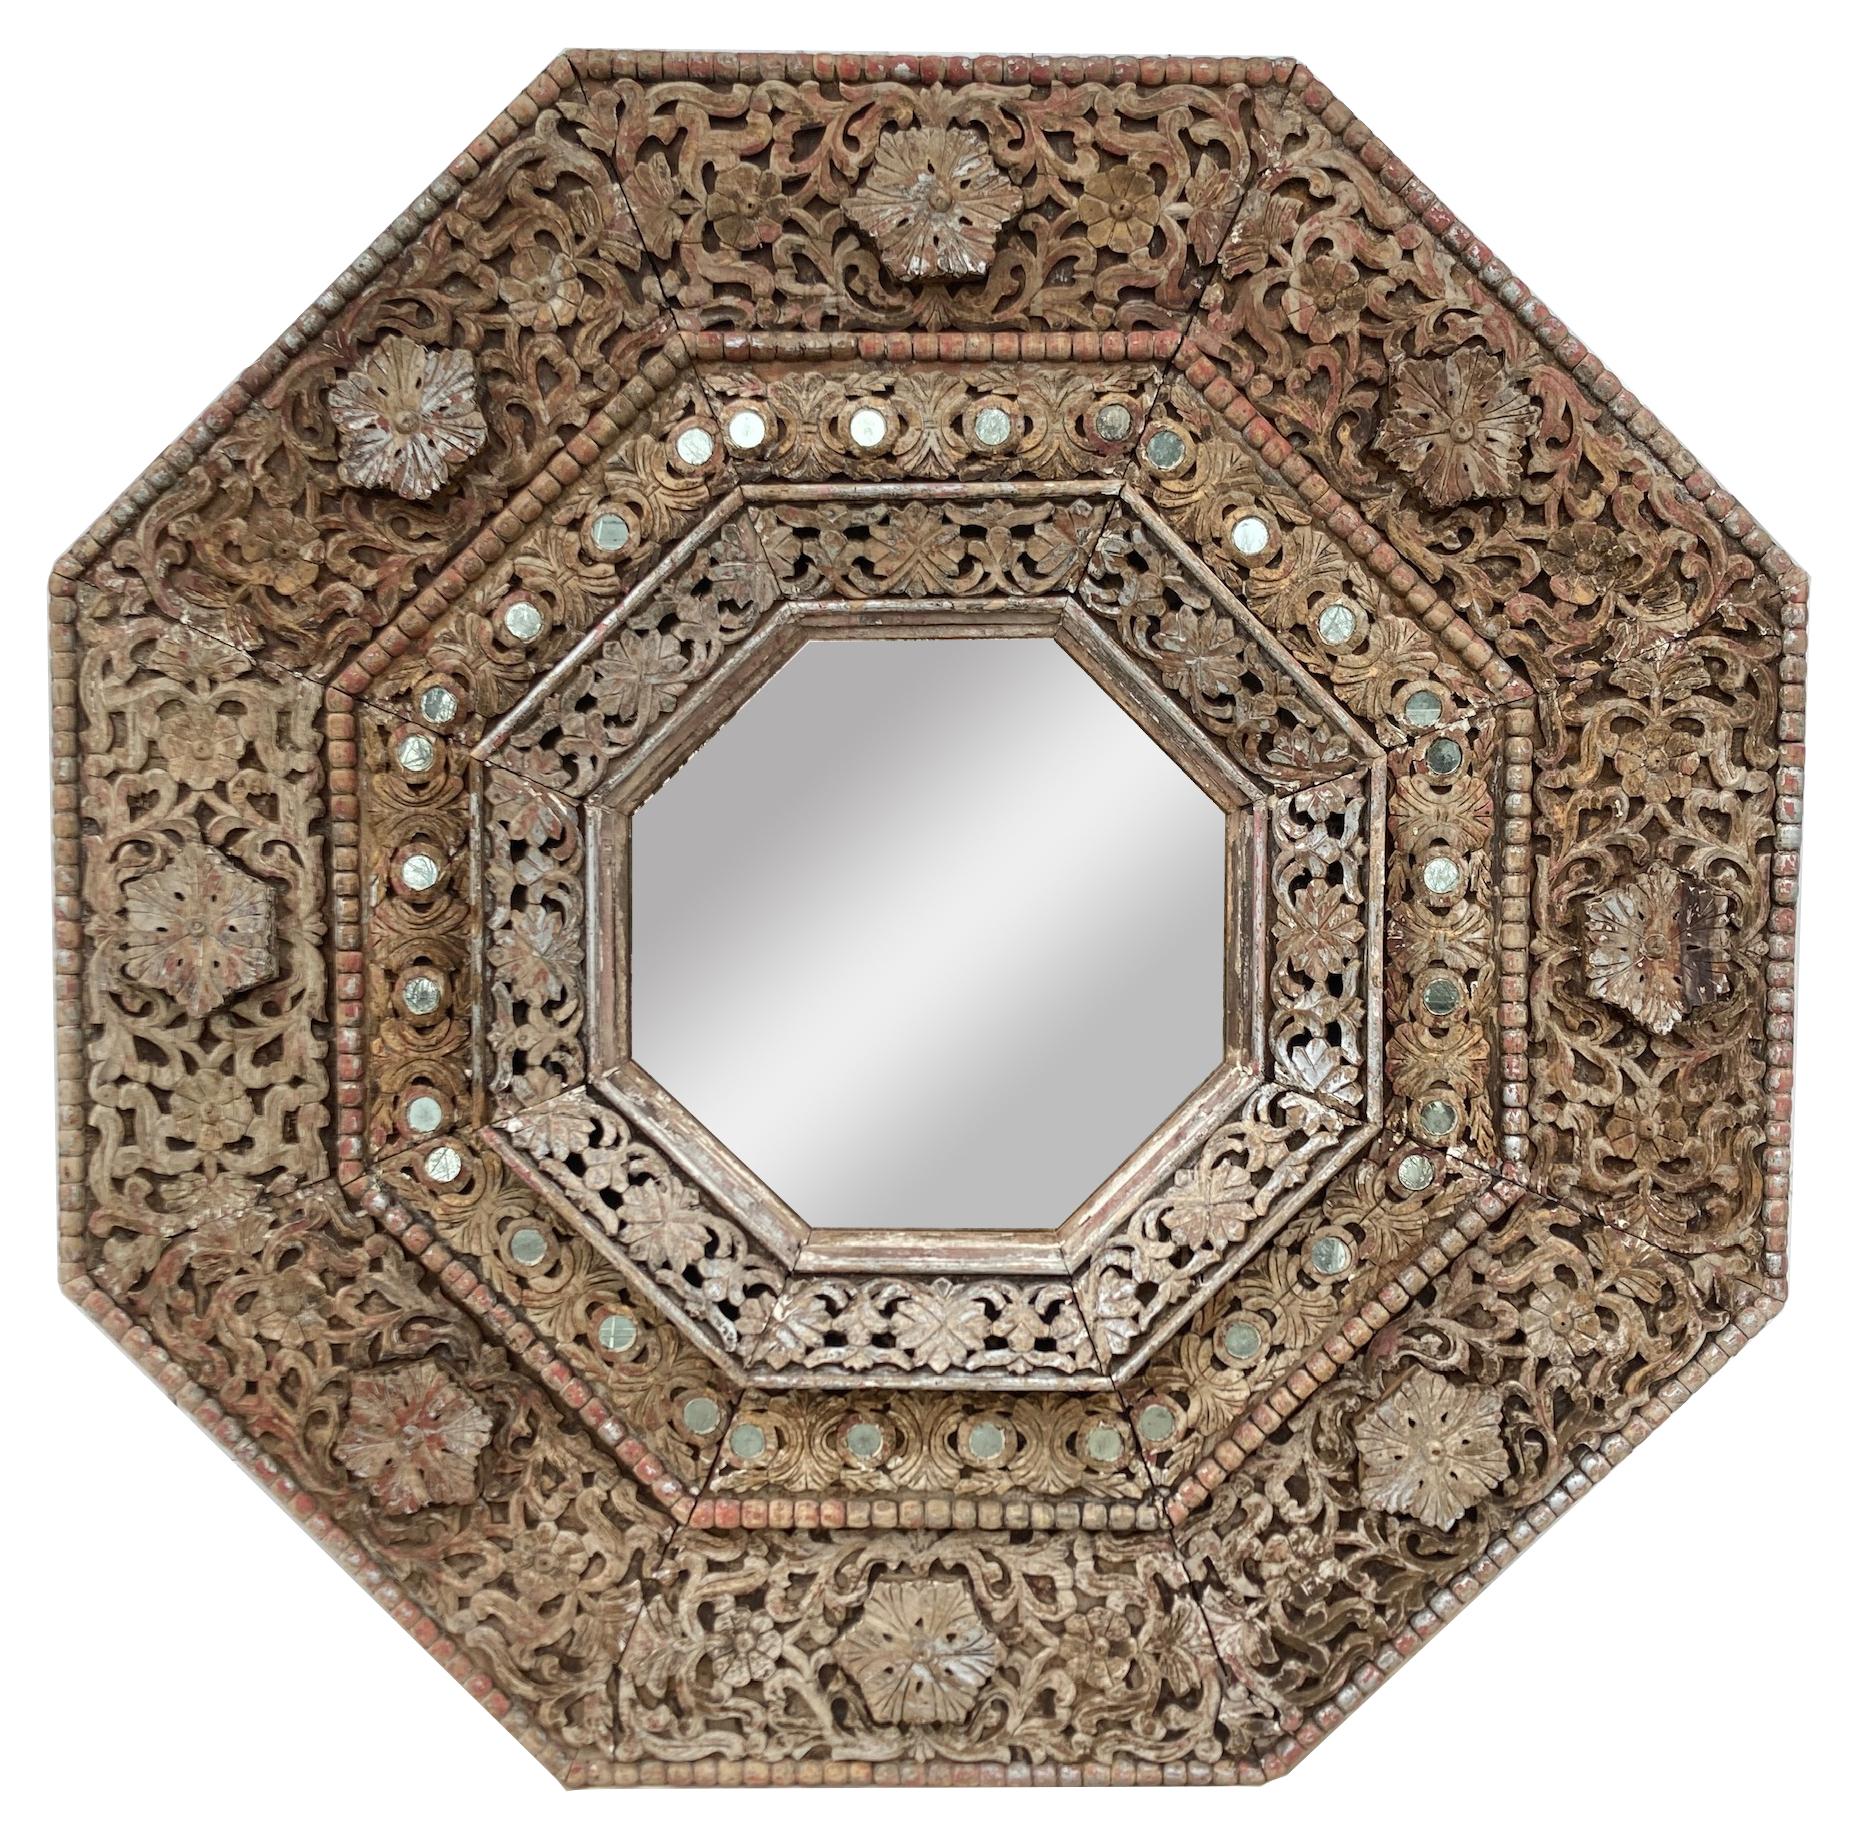 Monumental 1950's Carved Indian octagonal mirror. At 5 1/2 feet by 5 1/2 feet, this mirror is a true statement piece. The deep carving gives it a
feeling of folk art, while the weathered sumace and the carved motifs make the piece exotic.
We see